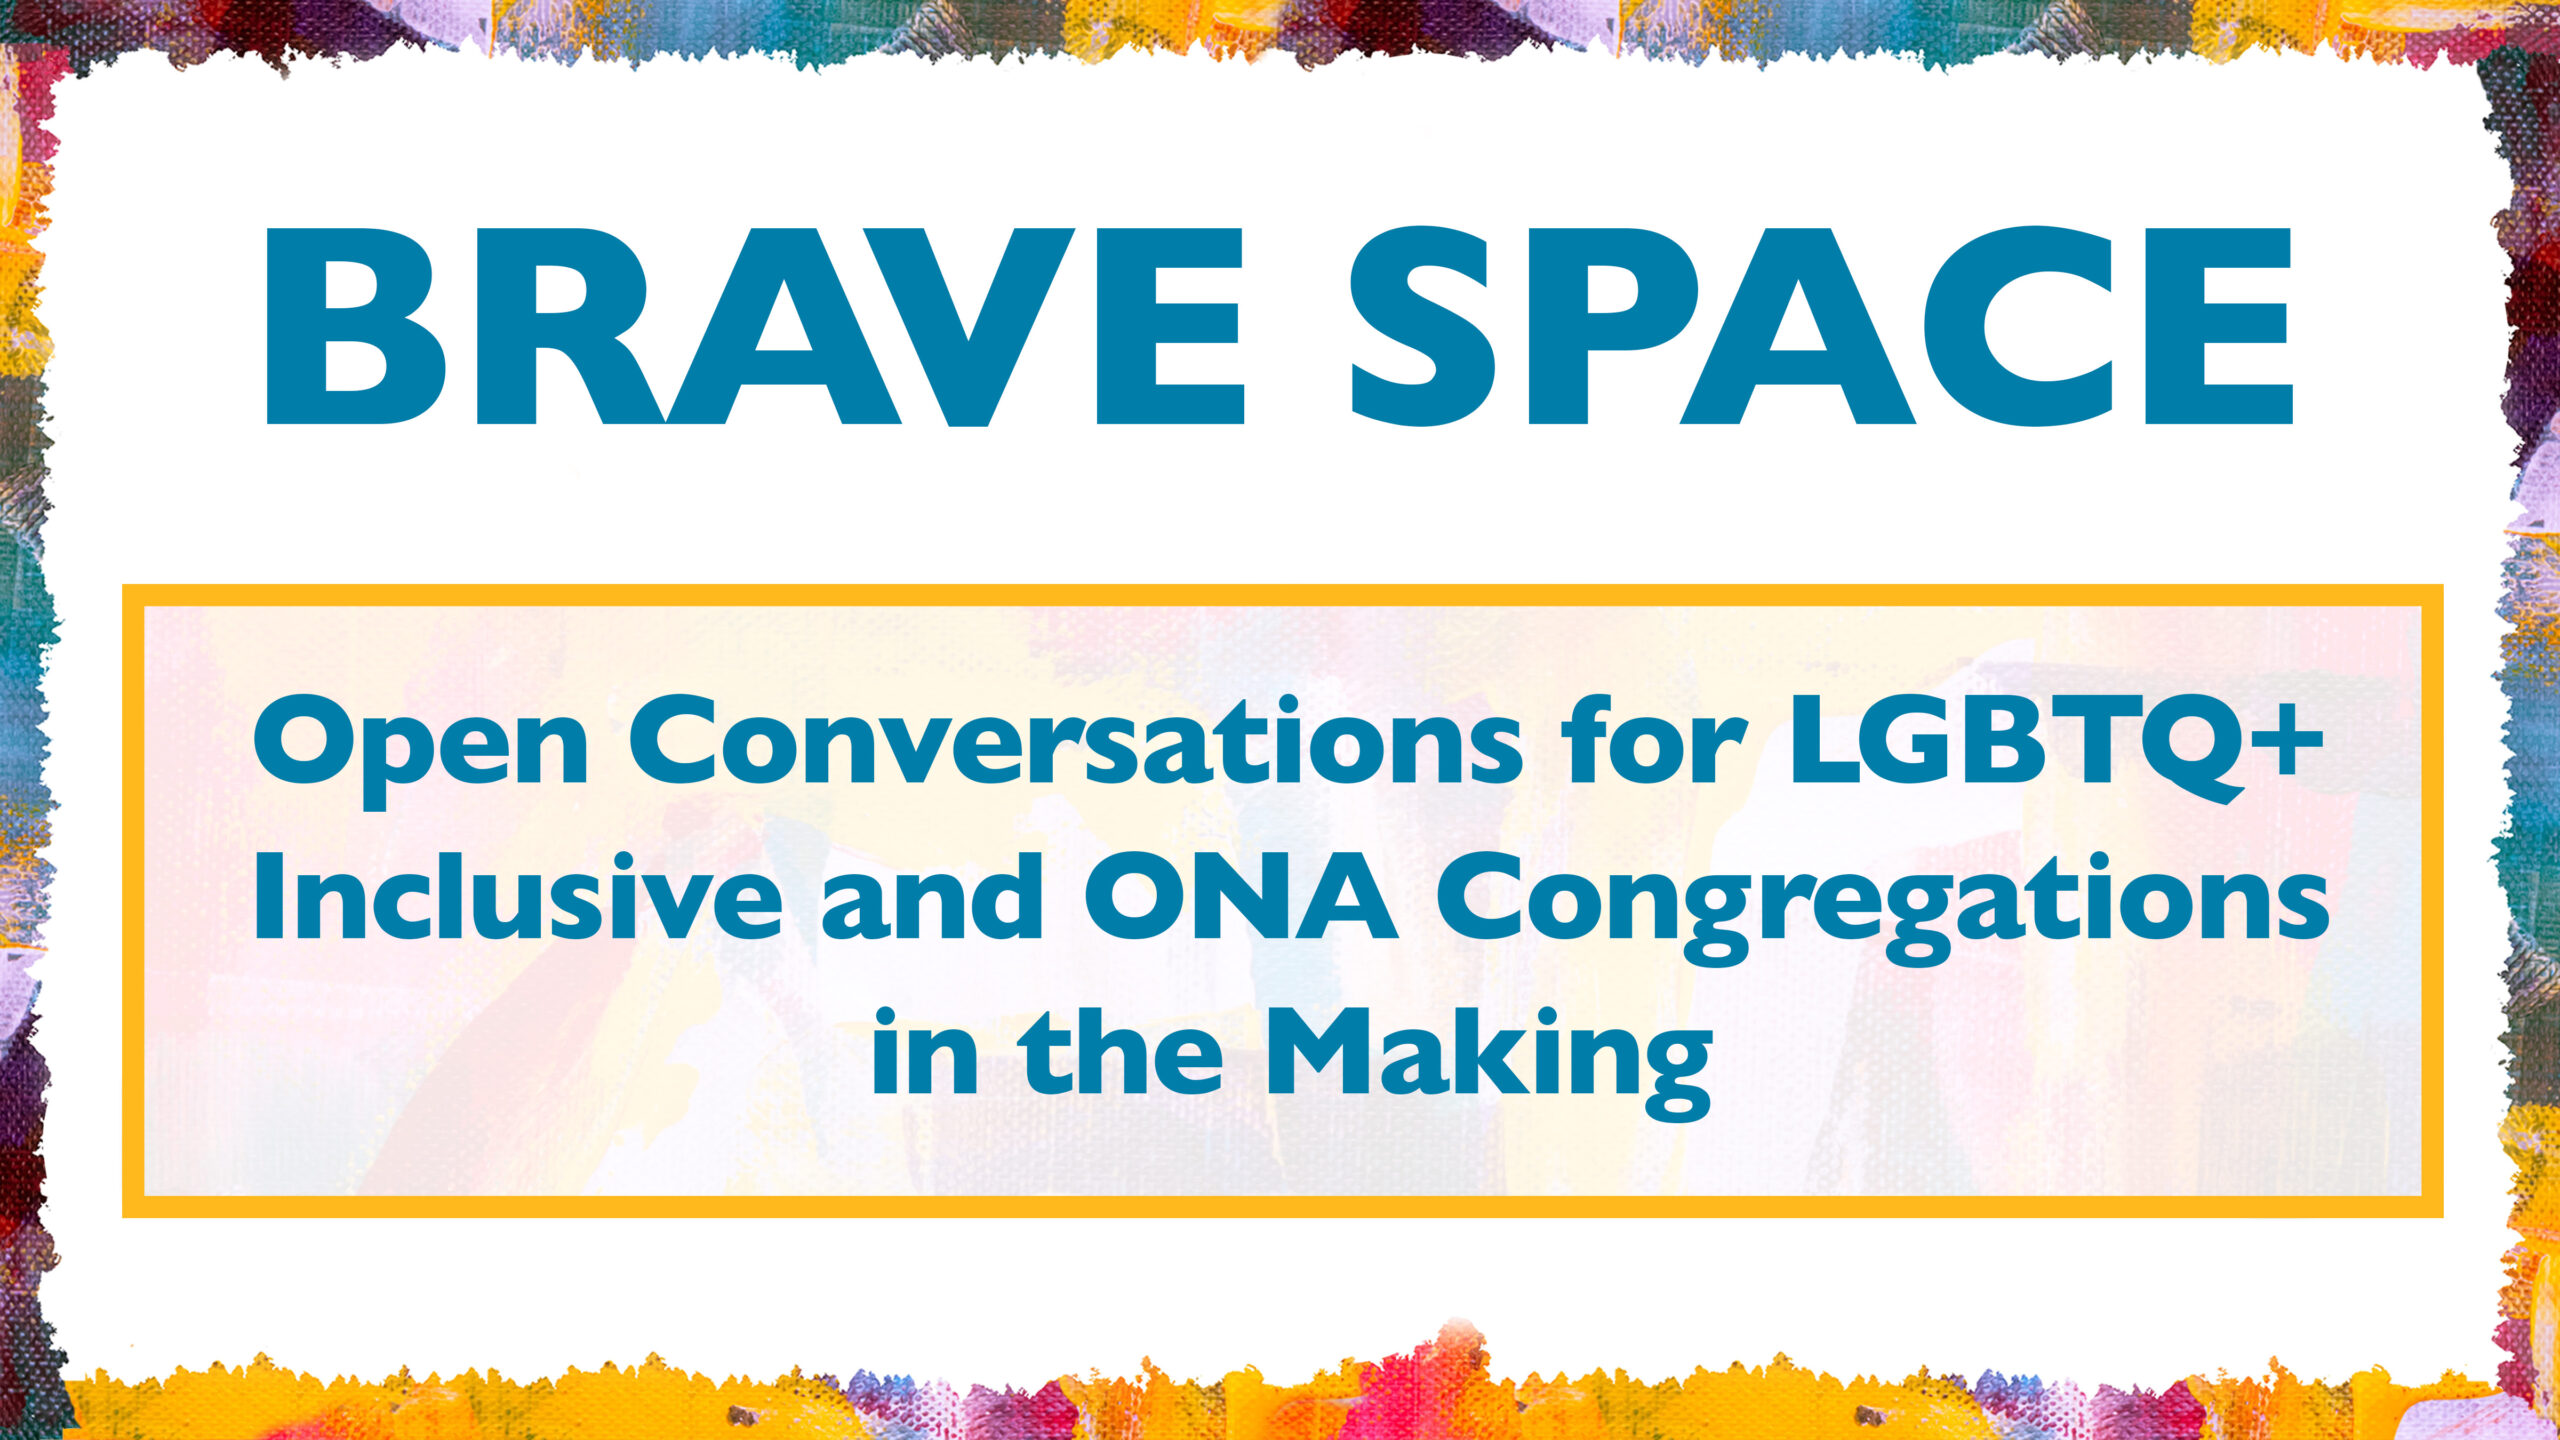 Brave Space: Open Conversations for LGBTQ+ Inclusive and ONA Congregations in the Making